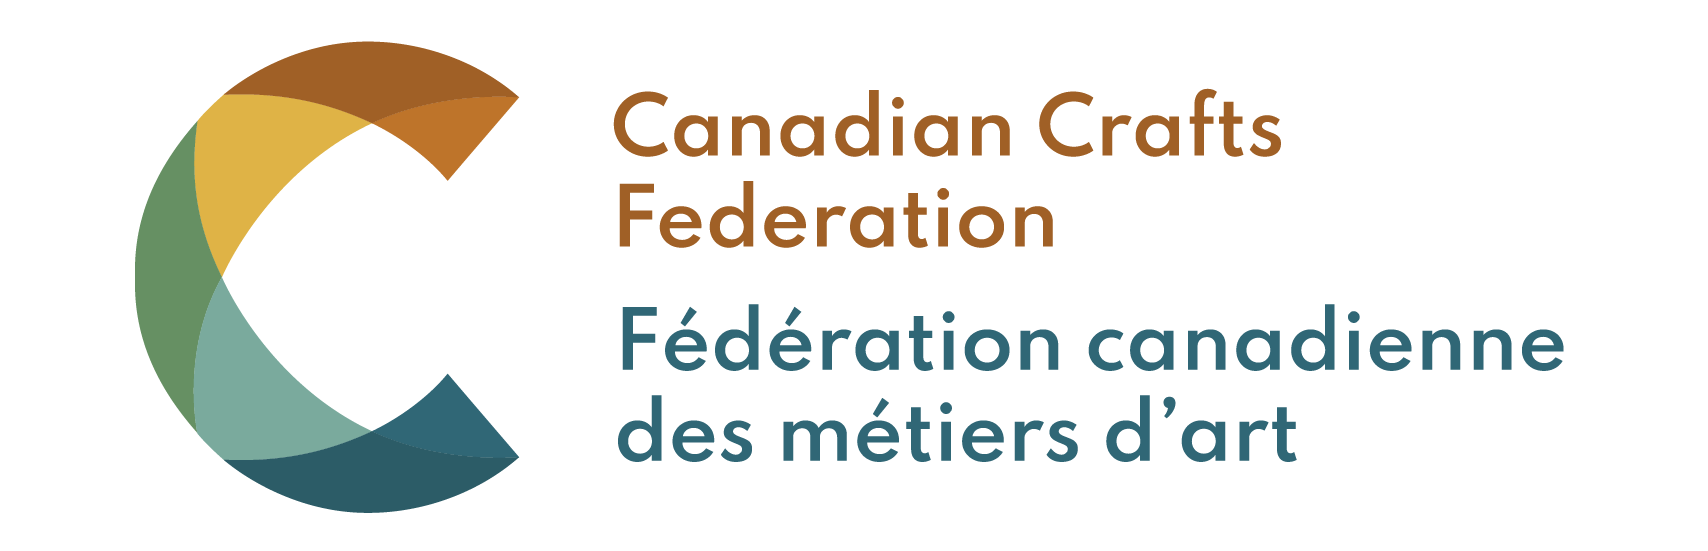 Logo for Canadian Crafts Federation